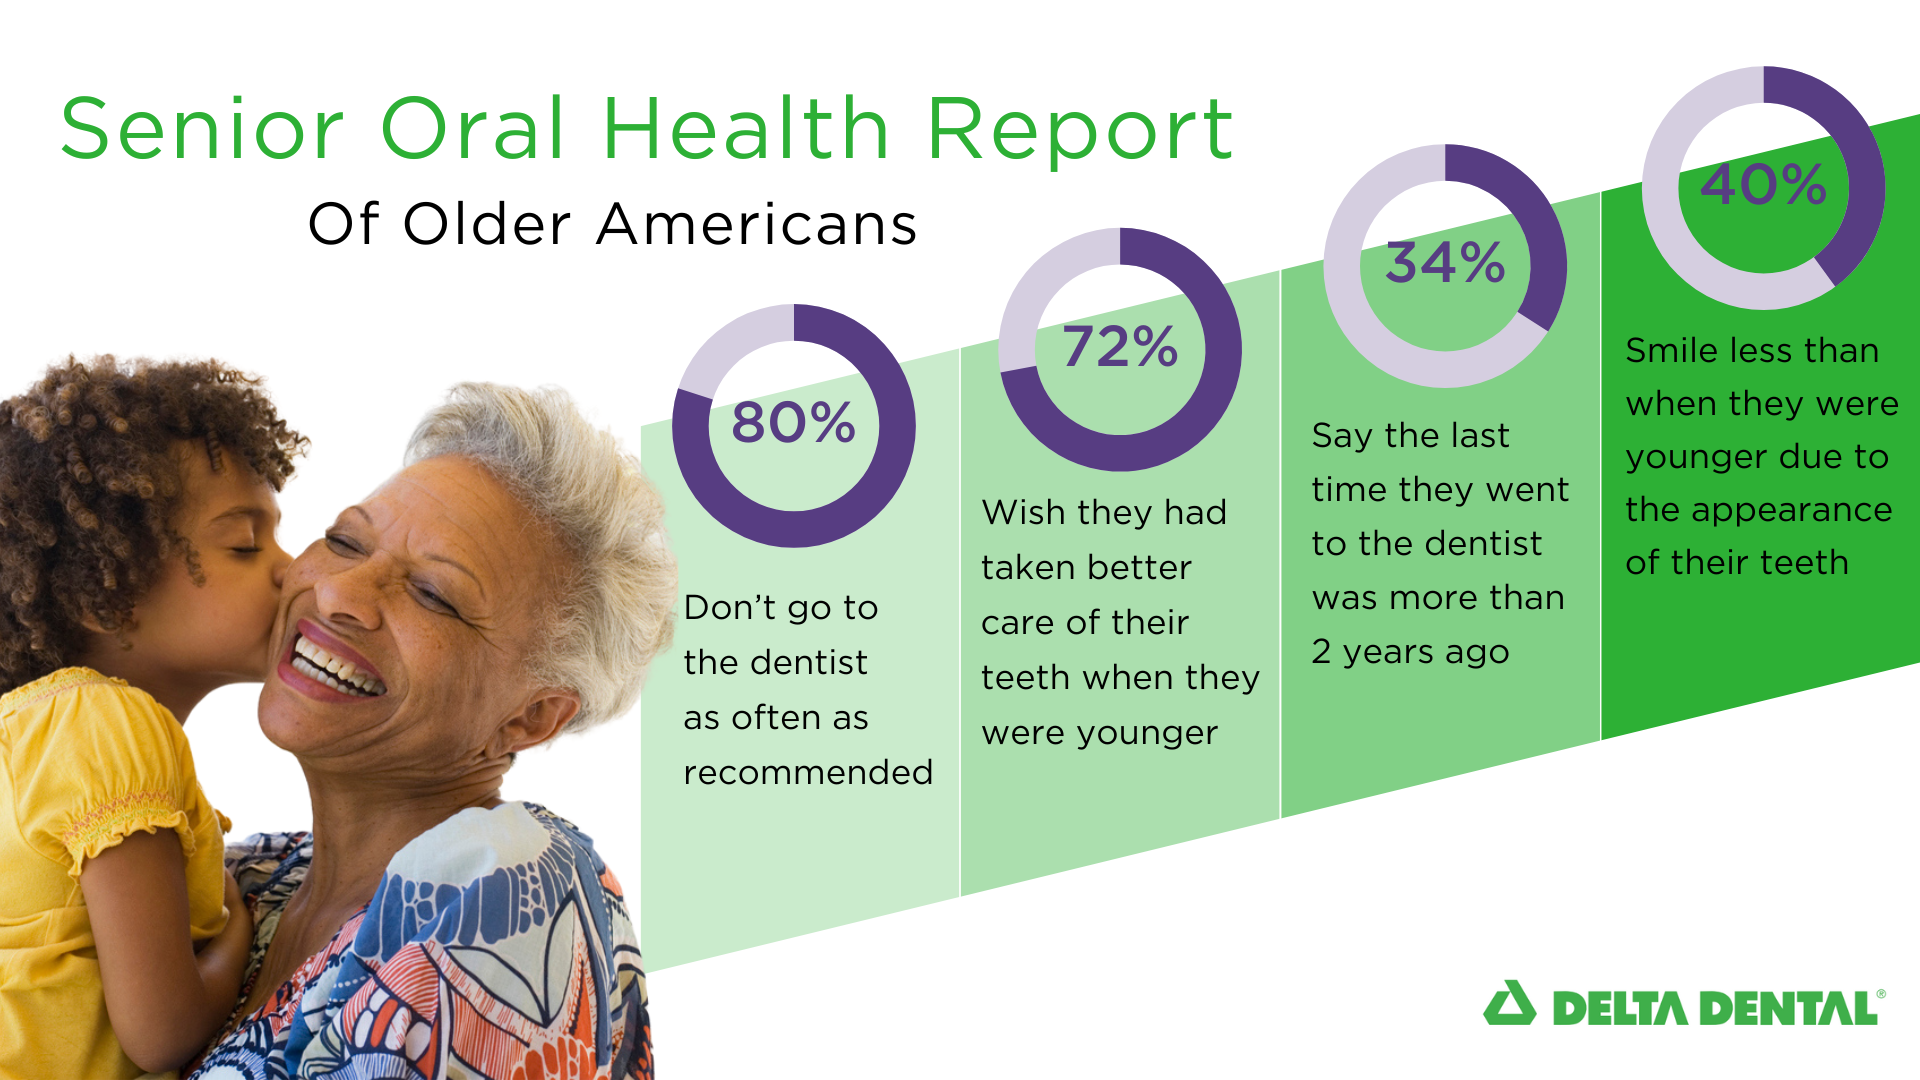 Senior Oral Health Report of Older Americans.  80 percent Don't go to the dentist as often as recommended.  72 percent Wish they had taken better care of their teeth when they were younger.  34 percent Say the last time they went to the dentist was more than two years ago.  40 percent Smile less than when they were younger due to the appearance of their teeth.